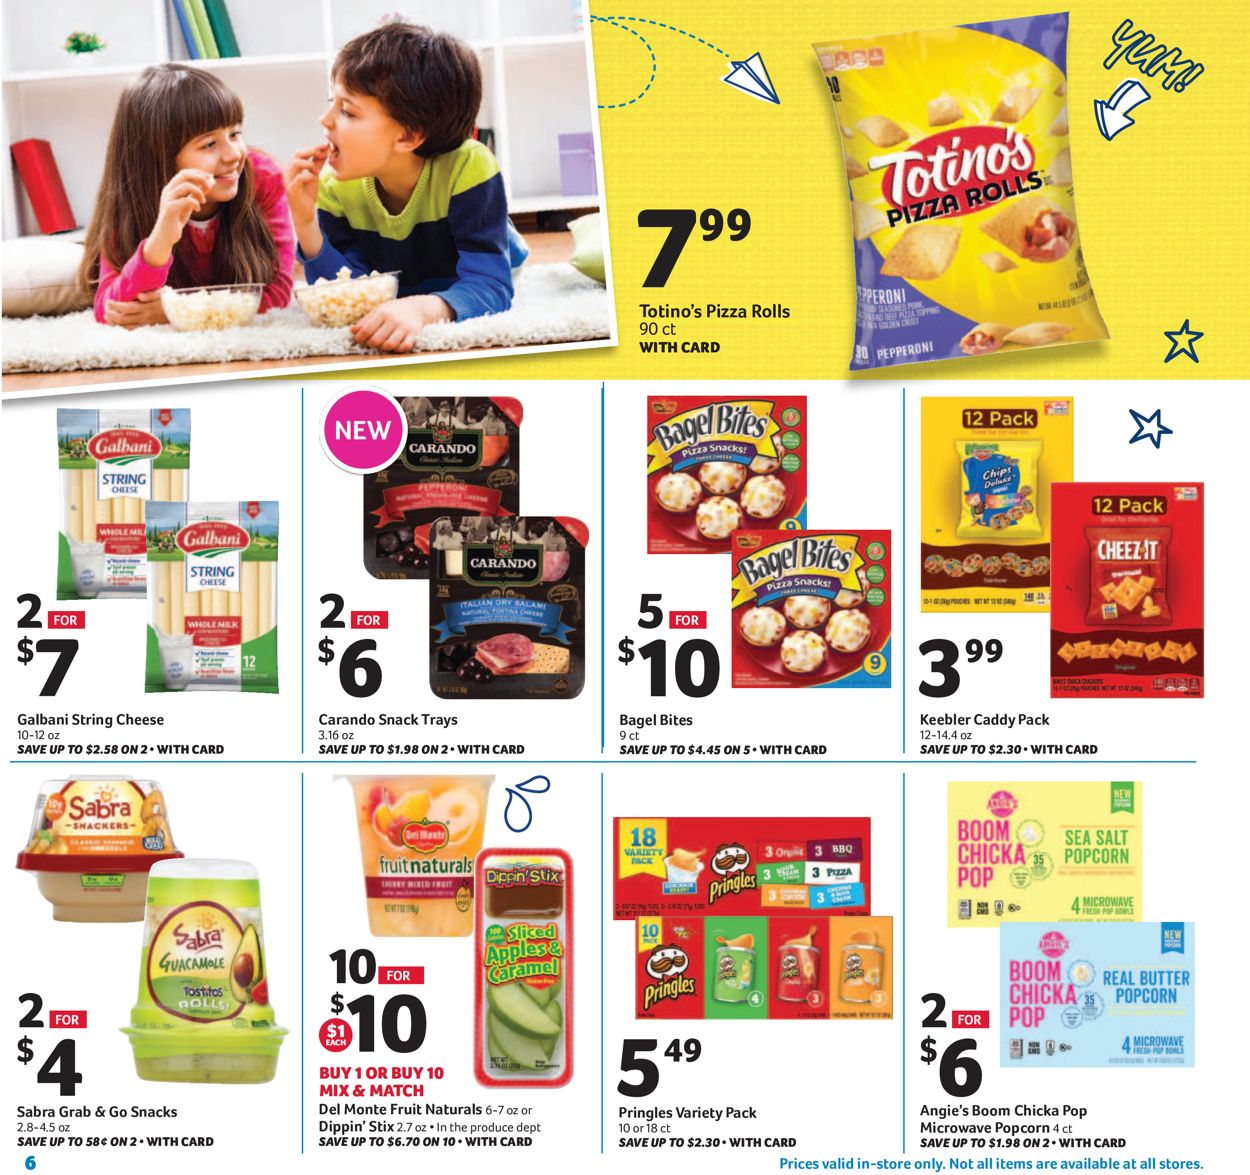 Catalogue BI-LO from 08/07/2019